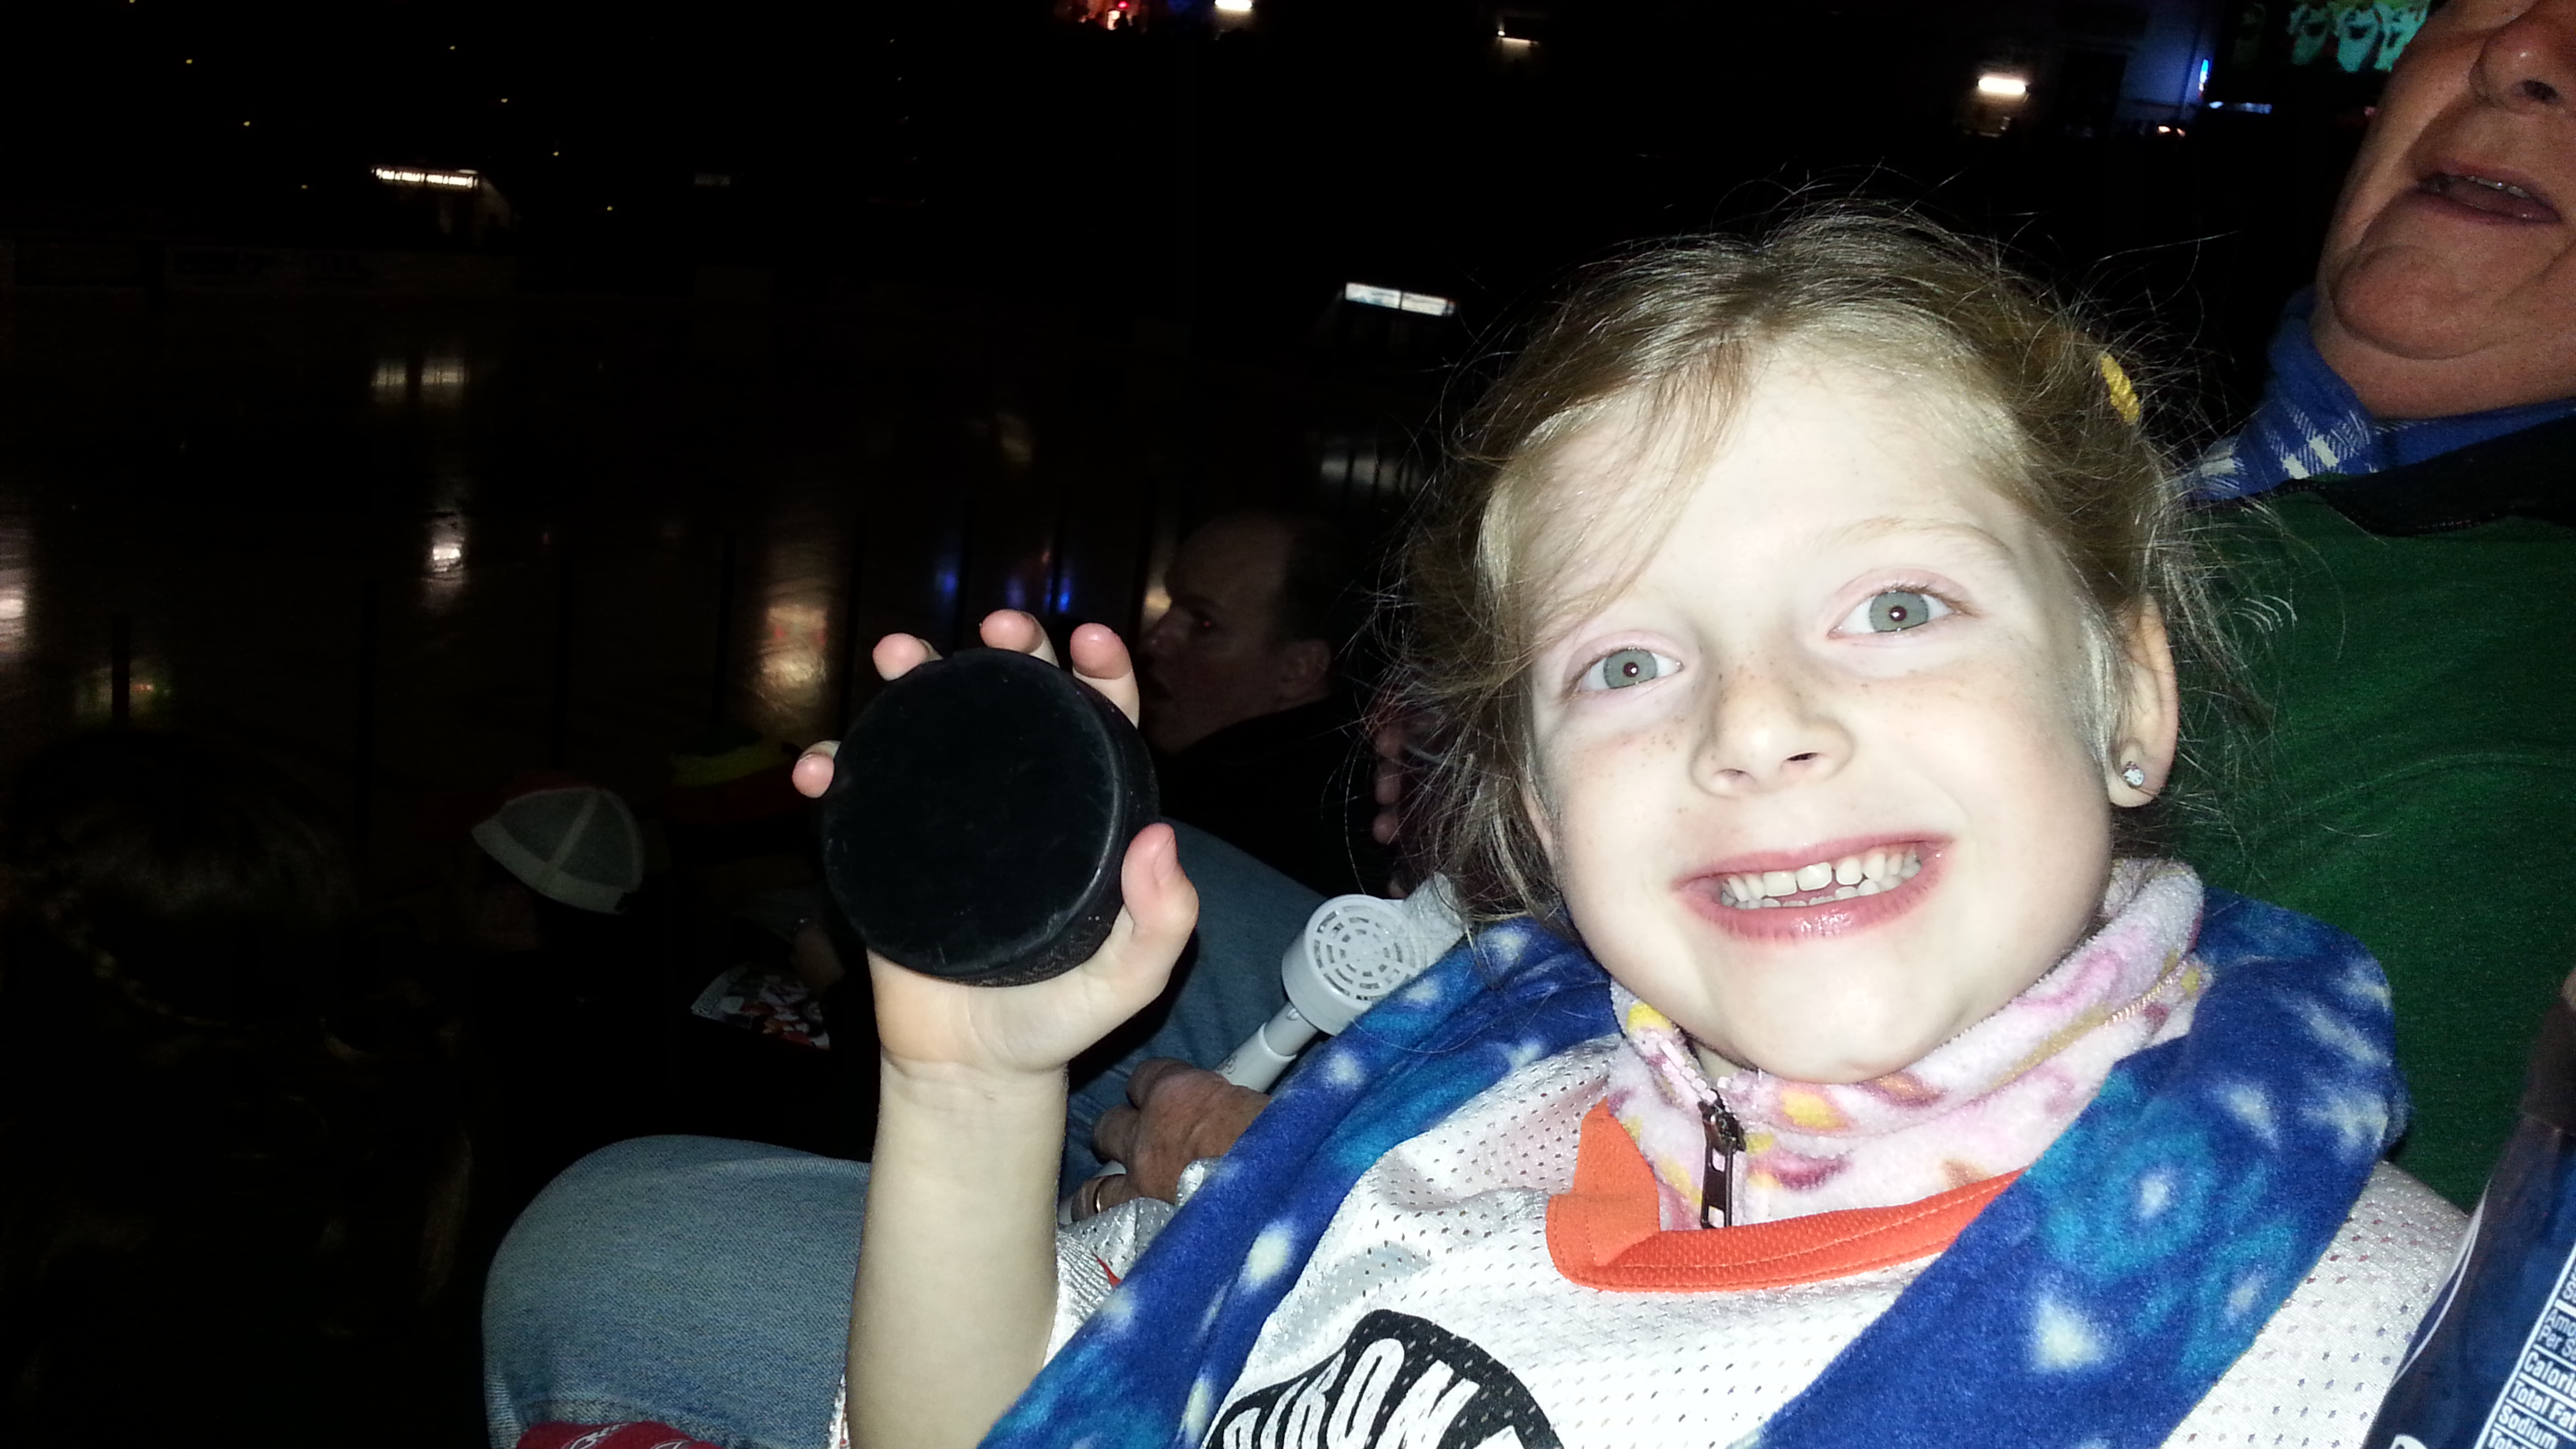 Charlotte with her puck